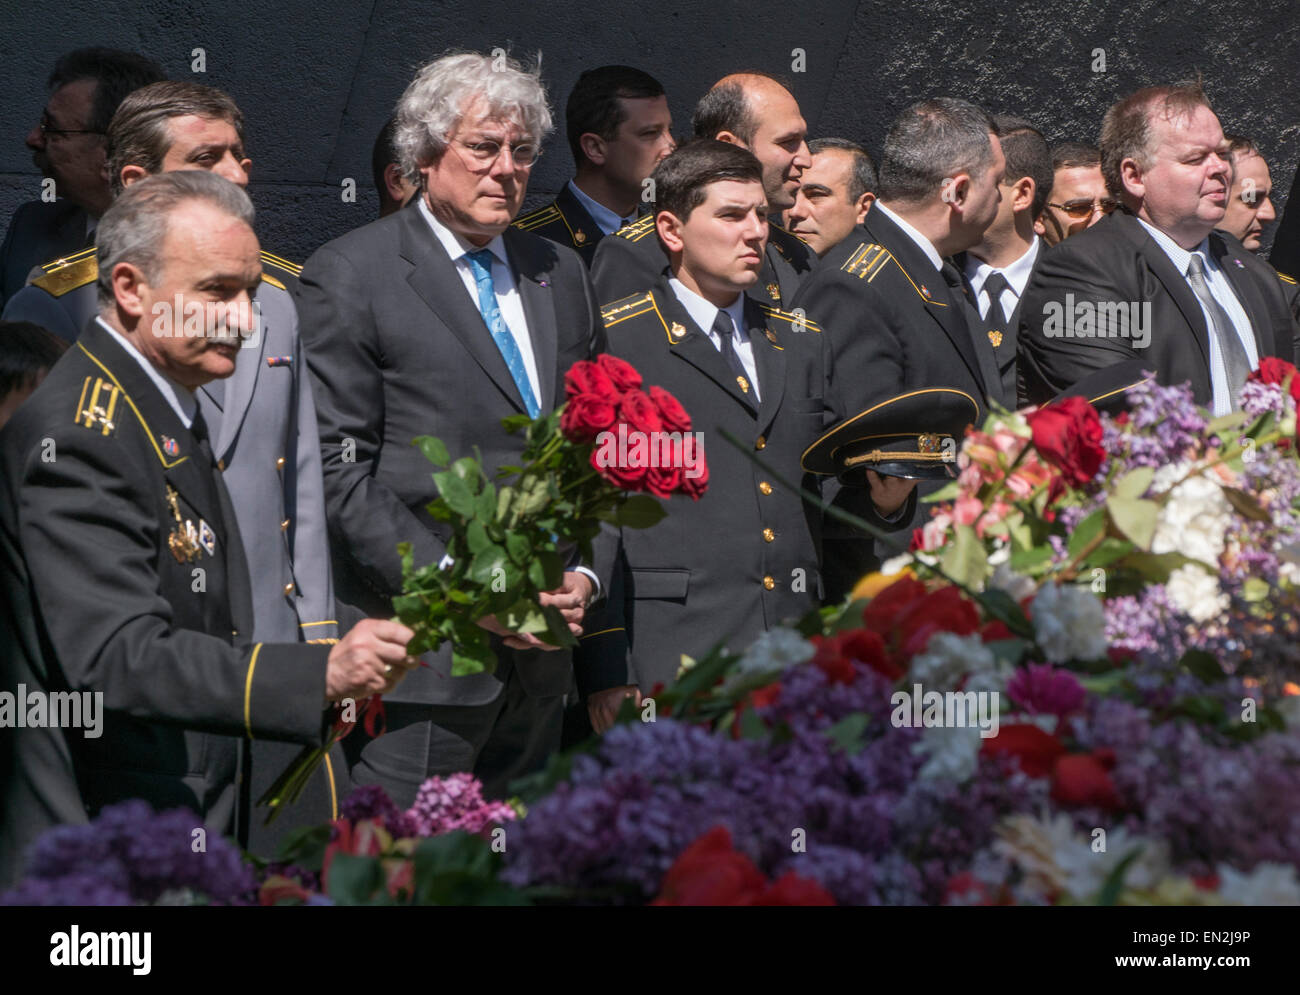 Yerevan, Armenia. 25th Apr, 2015. European Union delegates and Armenian military at commemoration at 100th anniversary of the Armenian genocide at the Armenian Genocide Memorial in Yerevan on April 25, 2015. Credit:  Dennis Cox/Alamy Live News Stock Photo